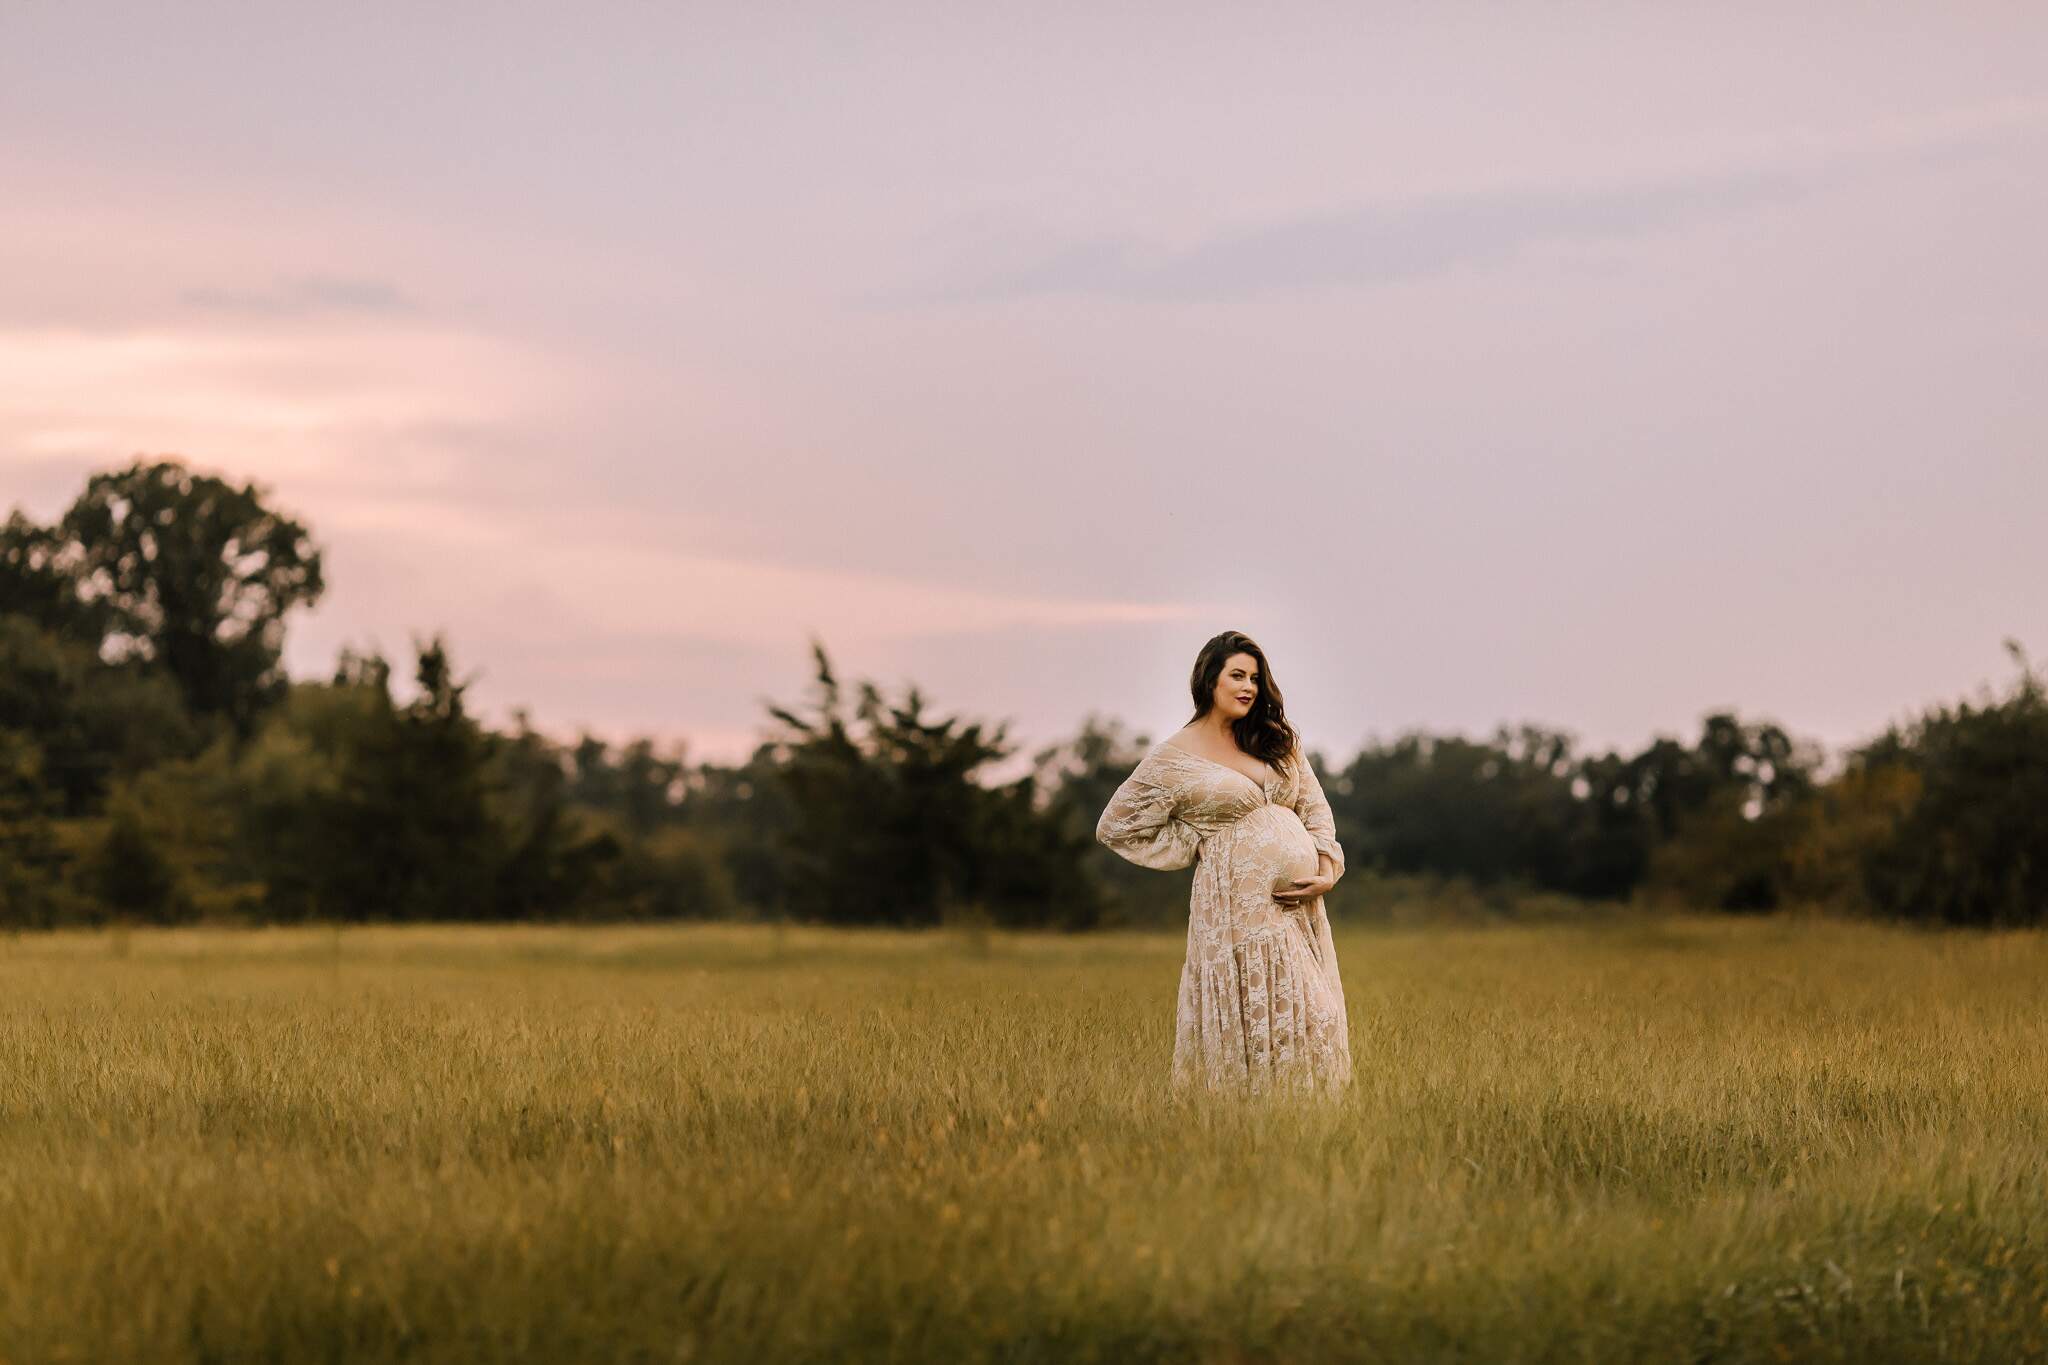 Outdoor maternity photoshoot with dramatic sunset and gowns in Pennsylvania.